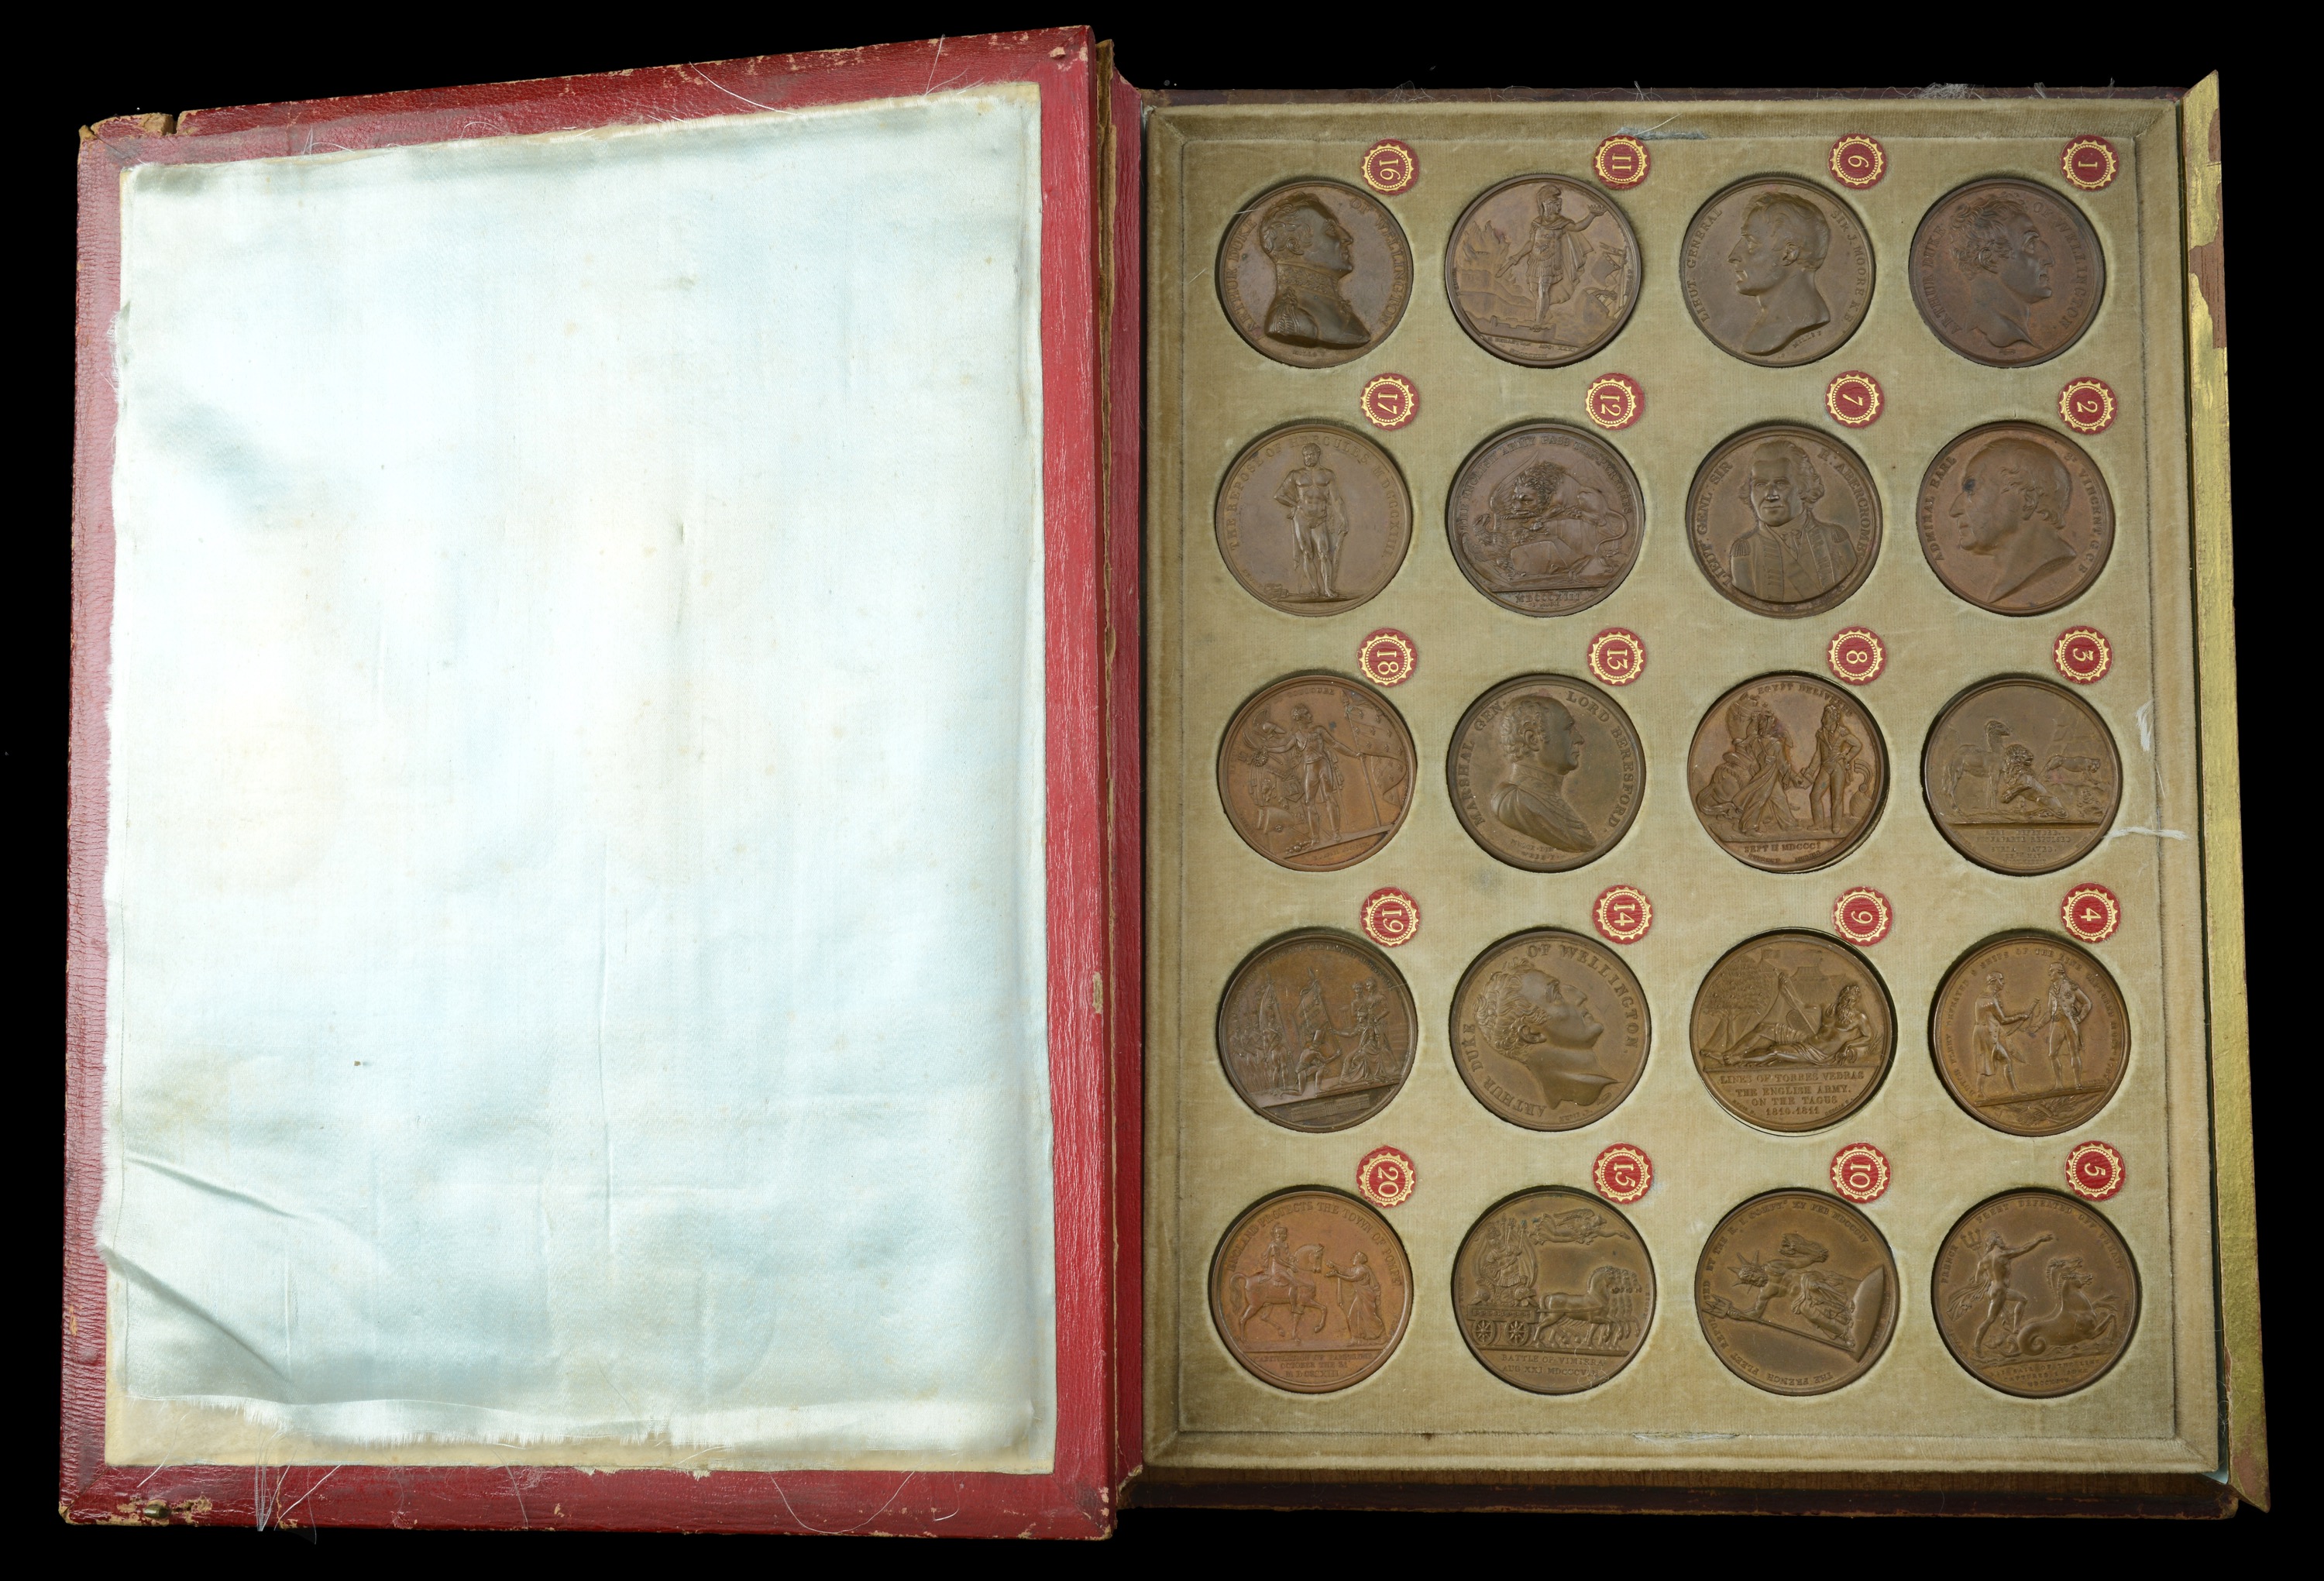 British Historical Medals from Various Properties